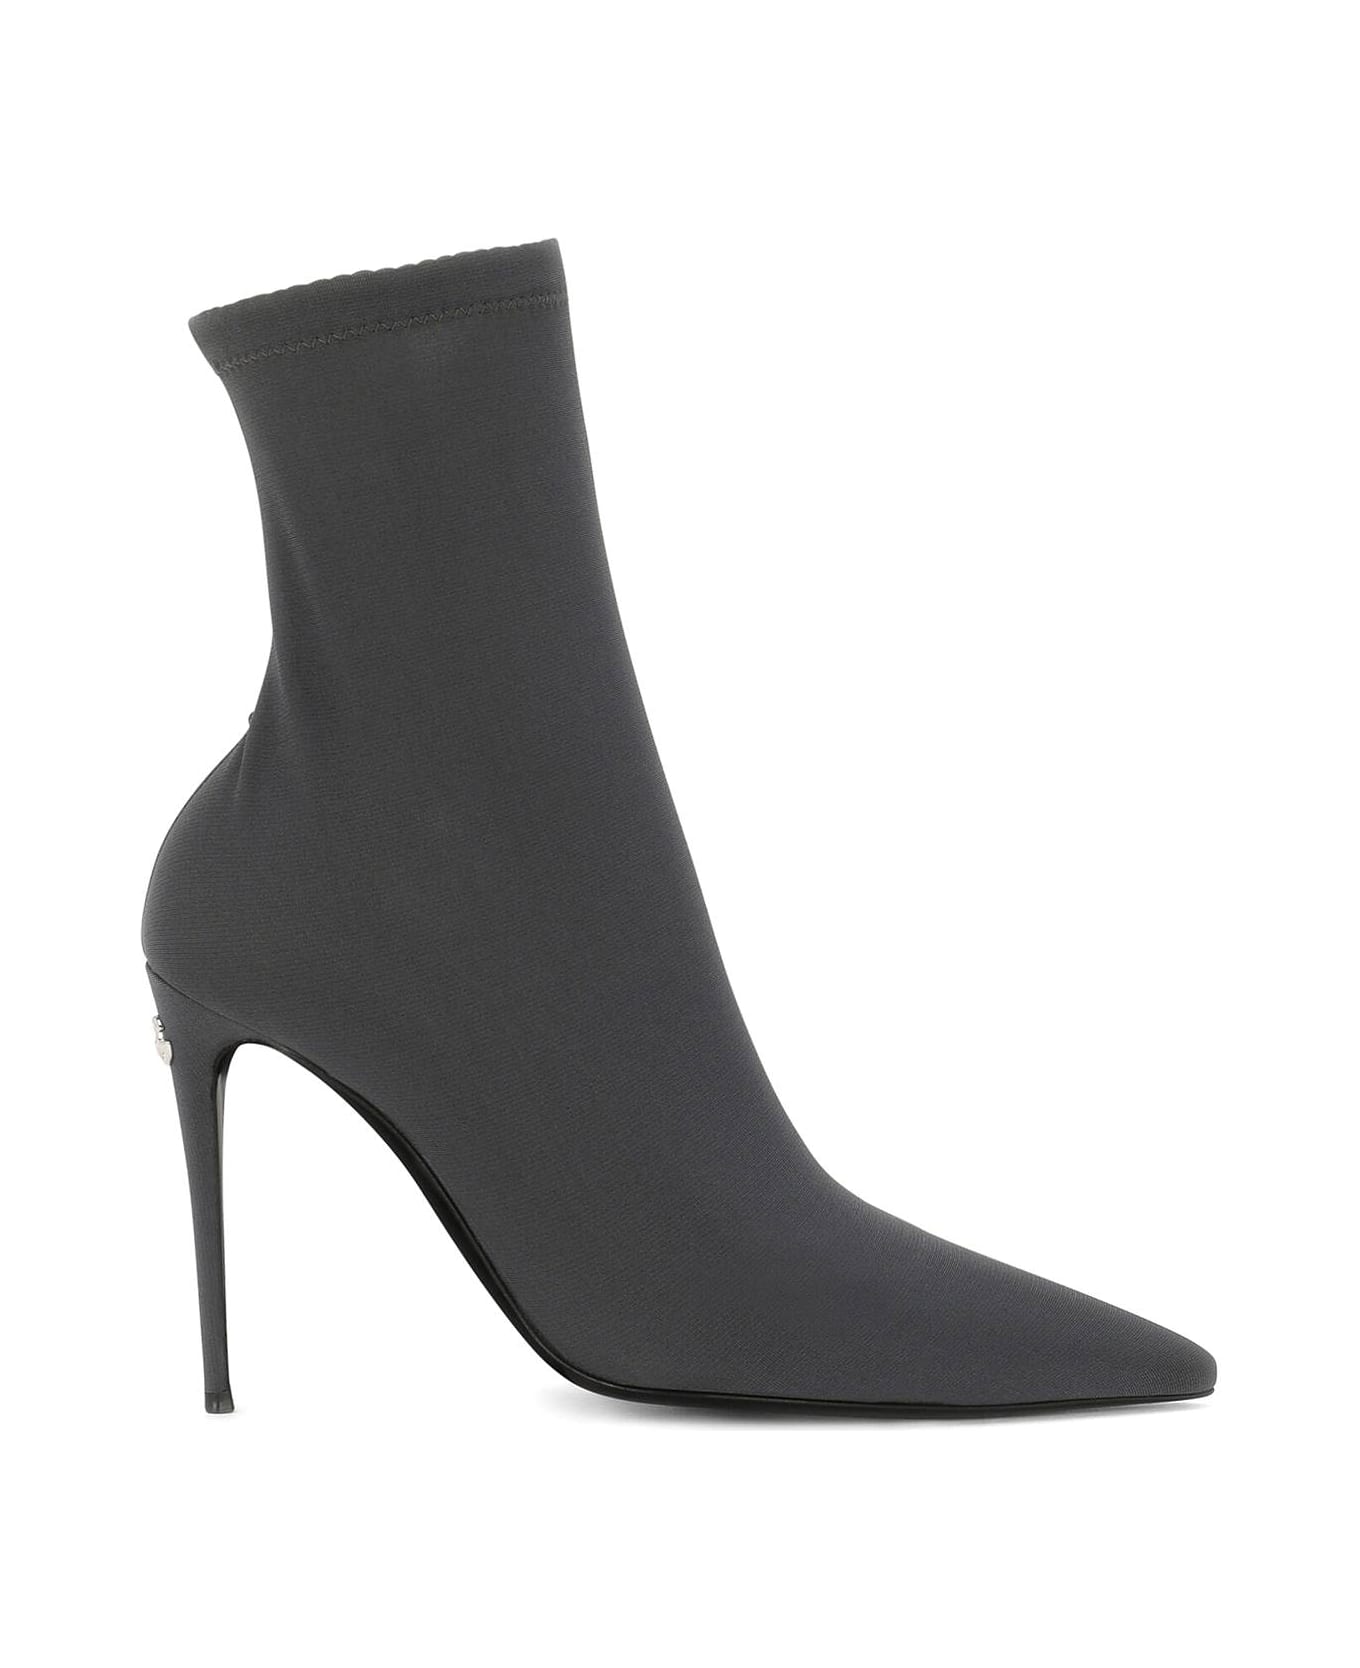 Dolce & Gabbana Stretch Jersey Ankle Boots - GRIGIO SCURO (Grey)